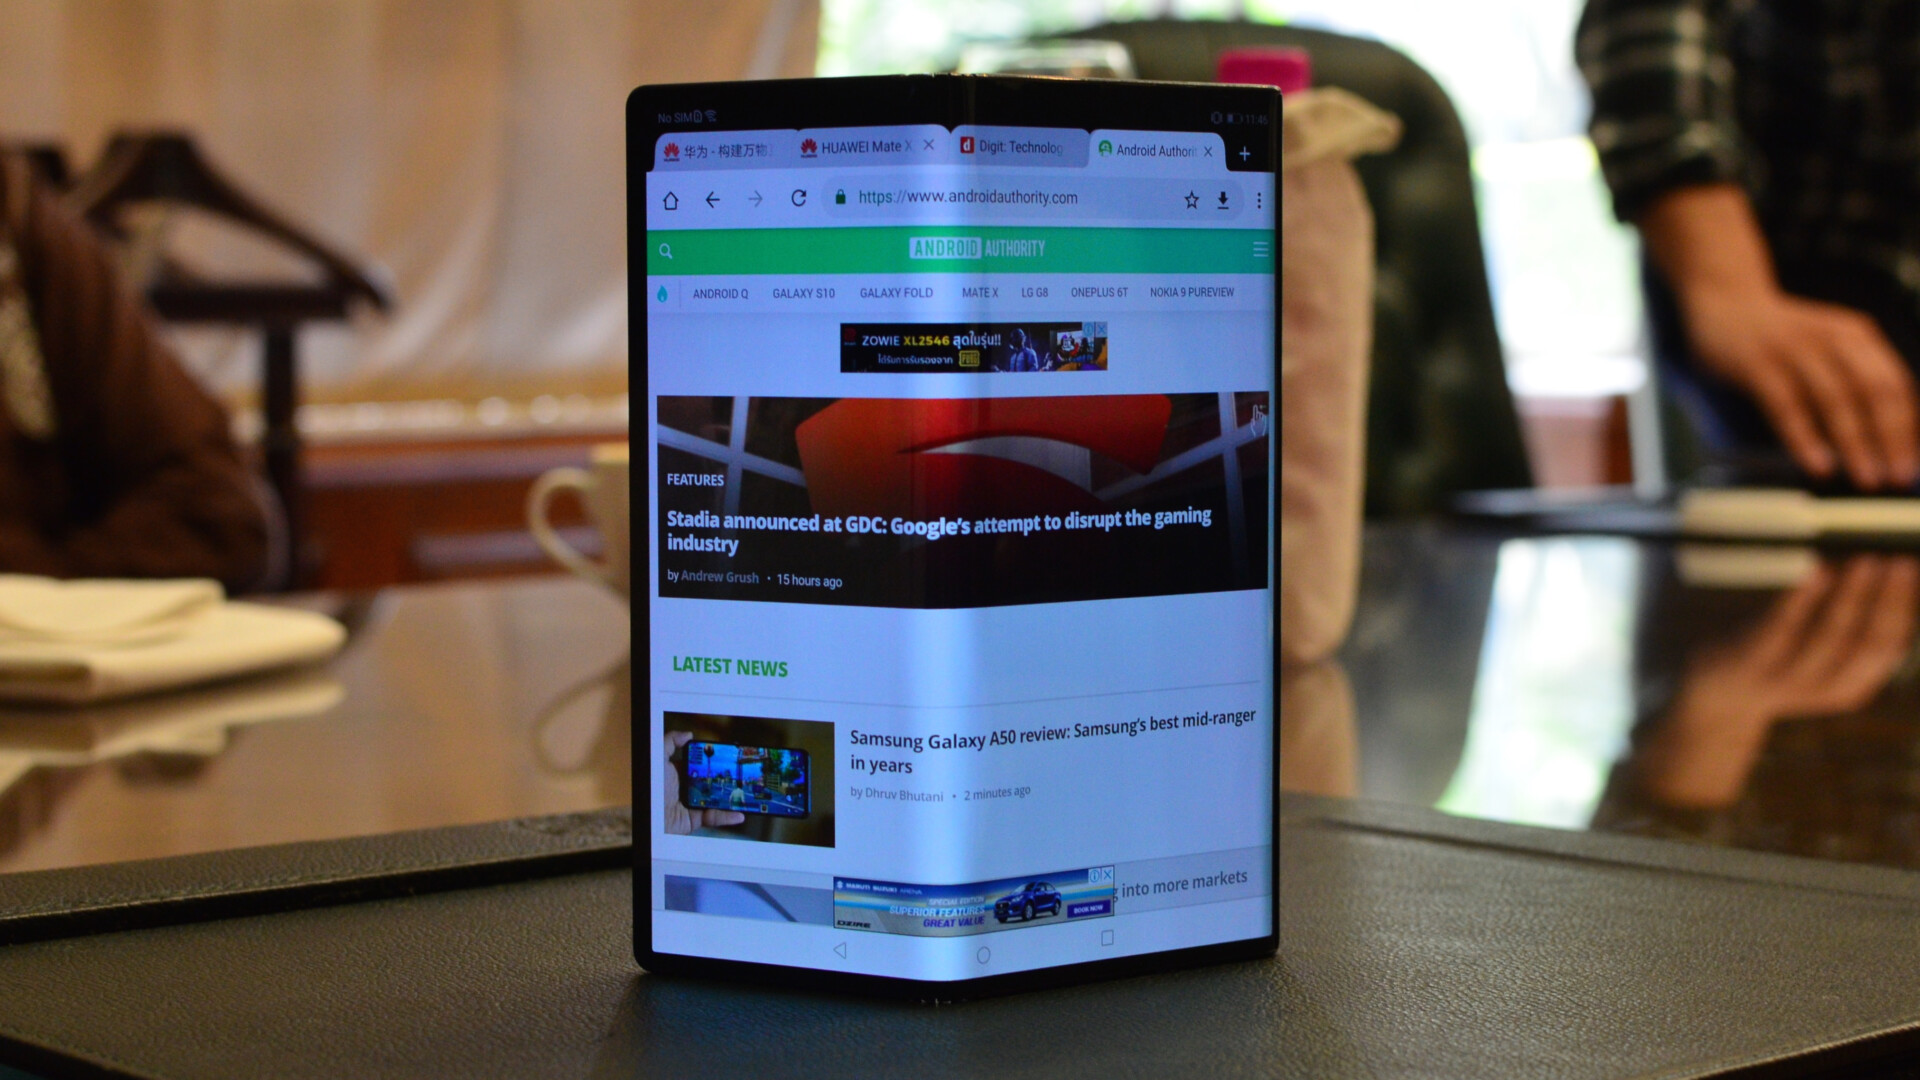 HUAWEI Mate X with Android Authority website on the display